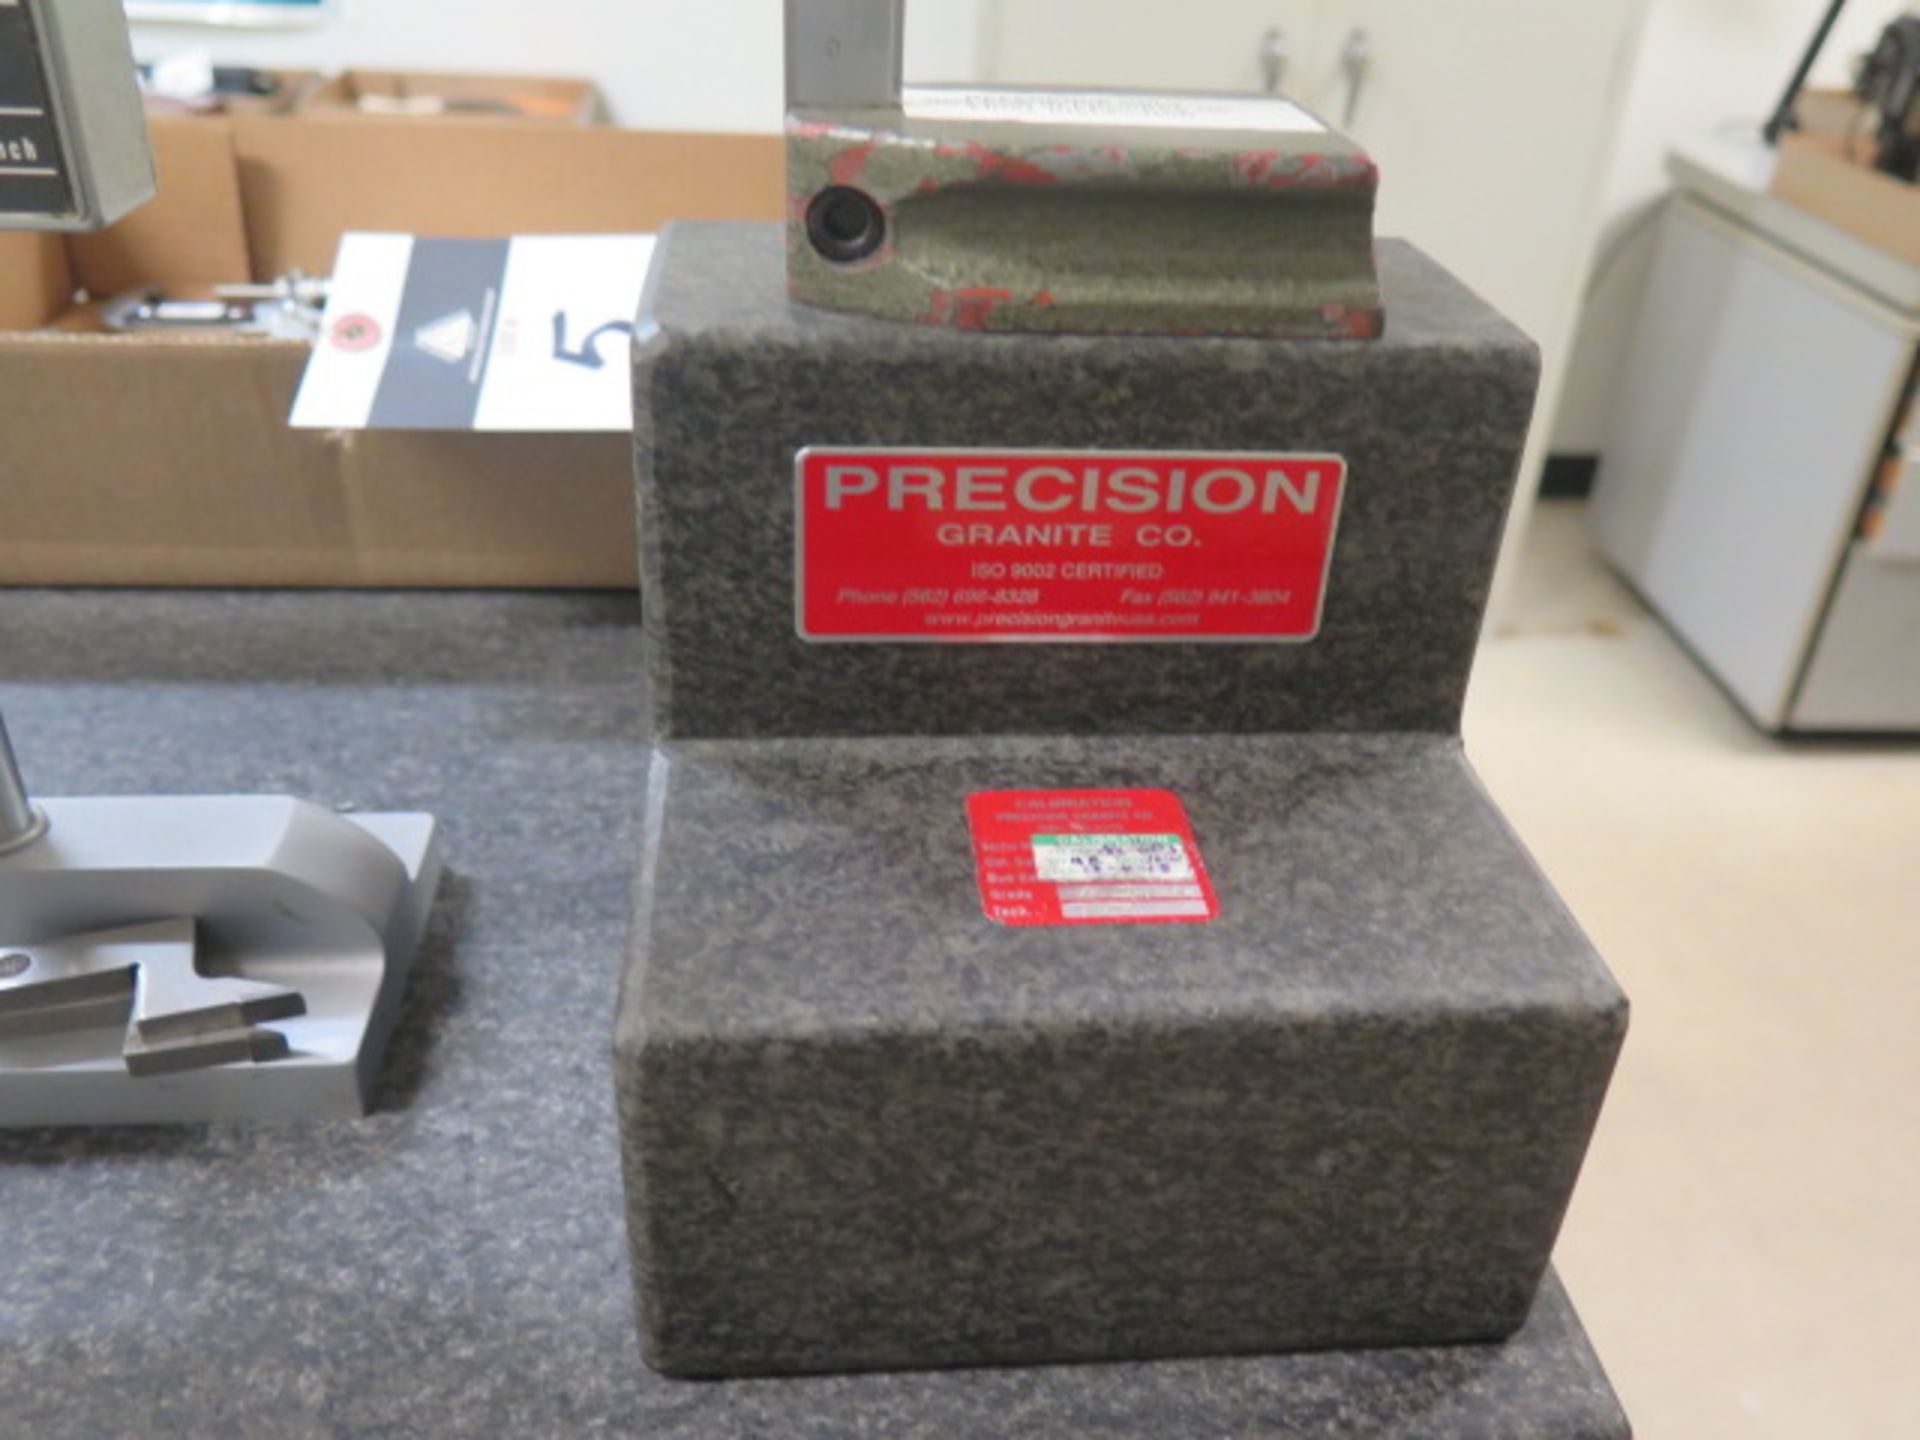 Mitutoyo 10" Vernier Height Gage and Precision 6" x 6" x 6" Granite Step Block - Image 2 of 2